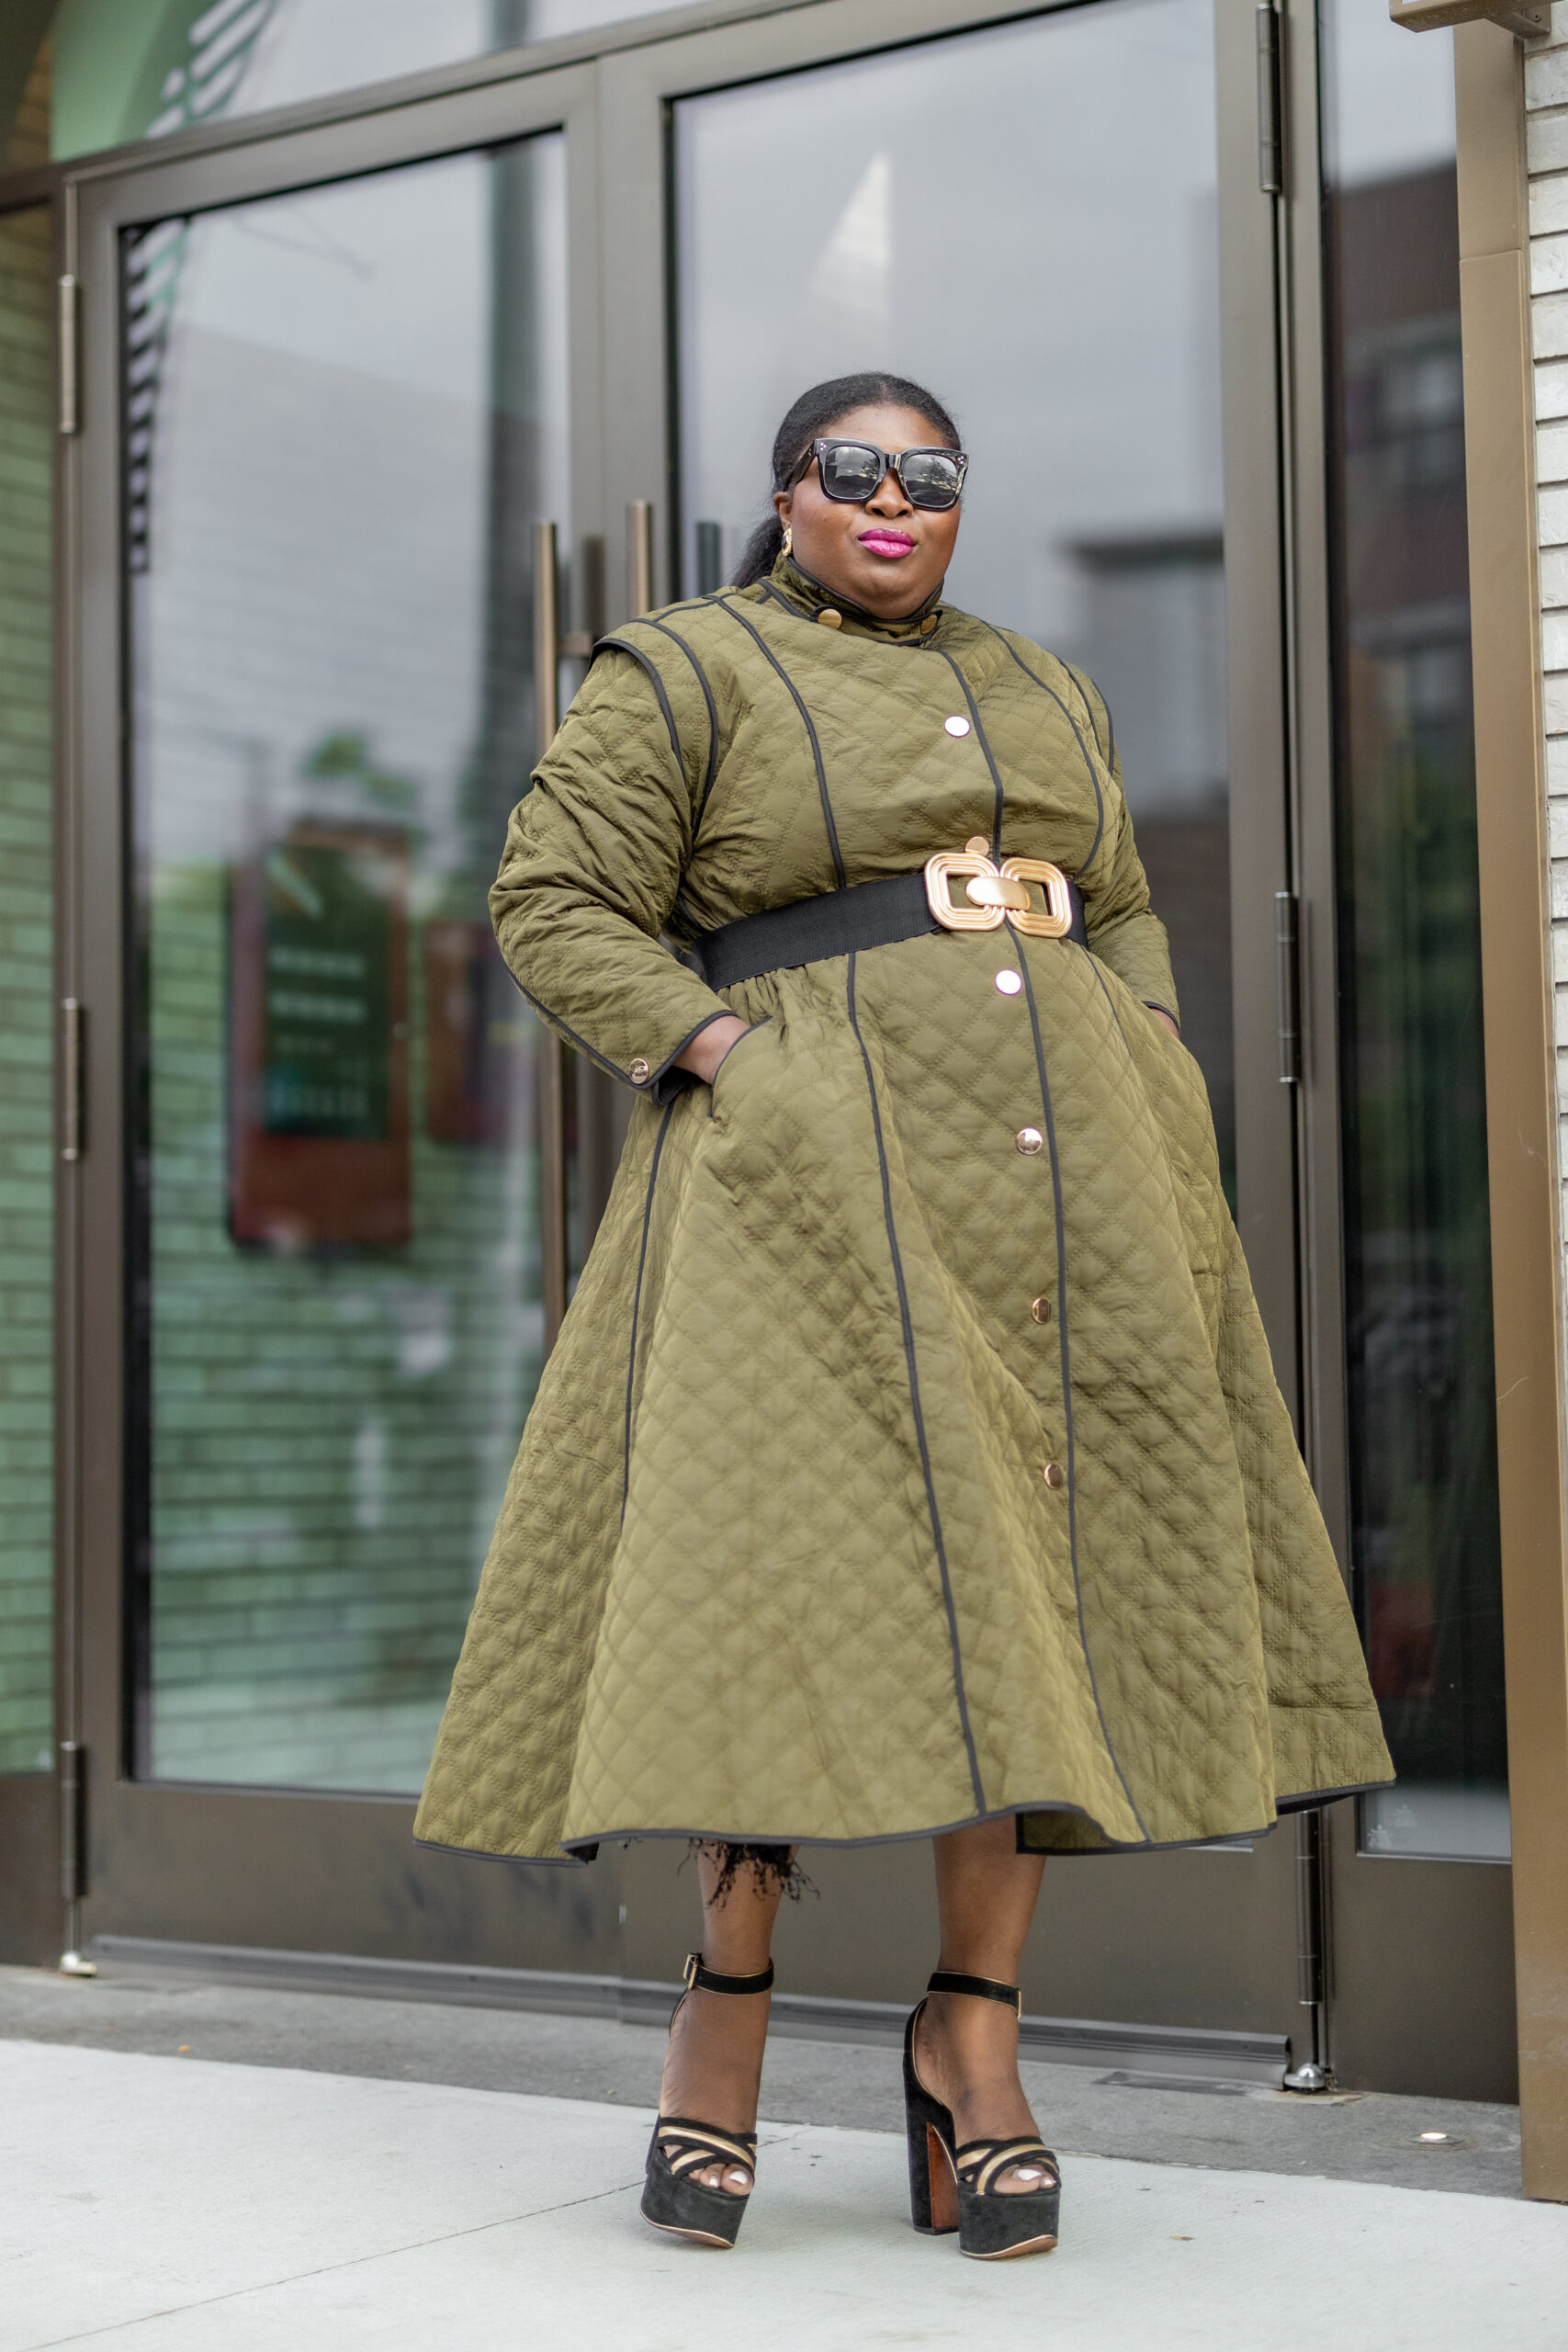 A Black woman wearing a quilted green coat dress with a black belt around the waist and black platform sandals. She's wearing sunglasses